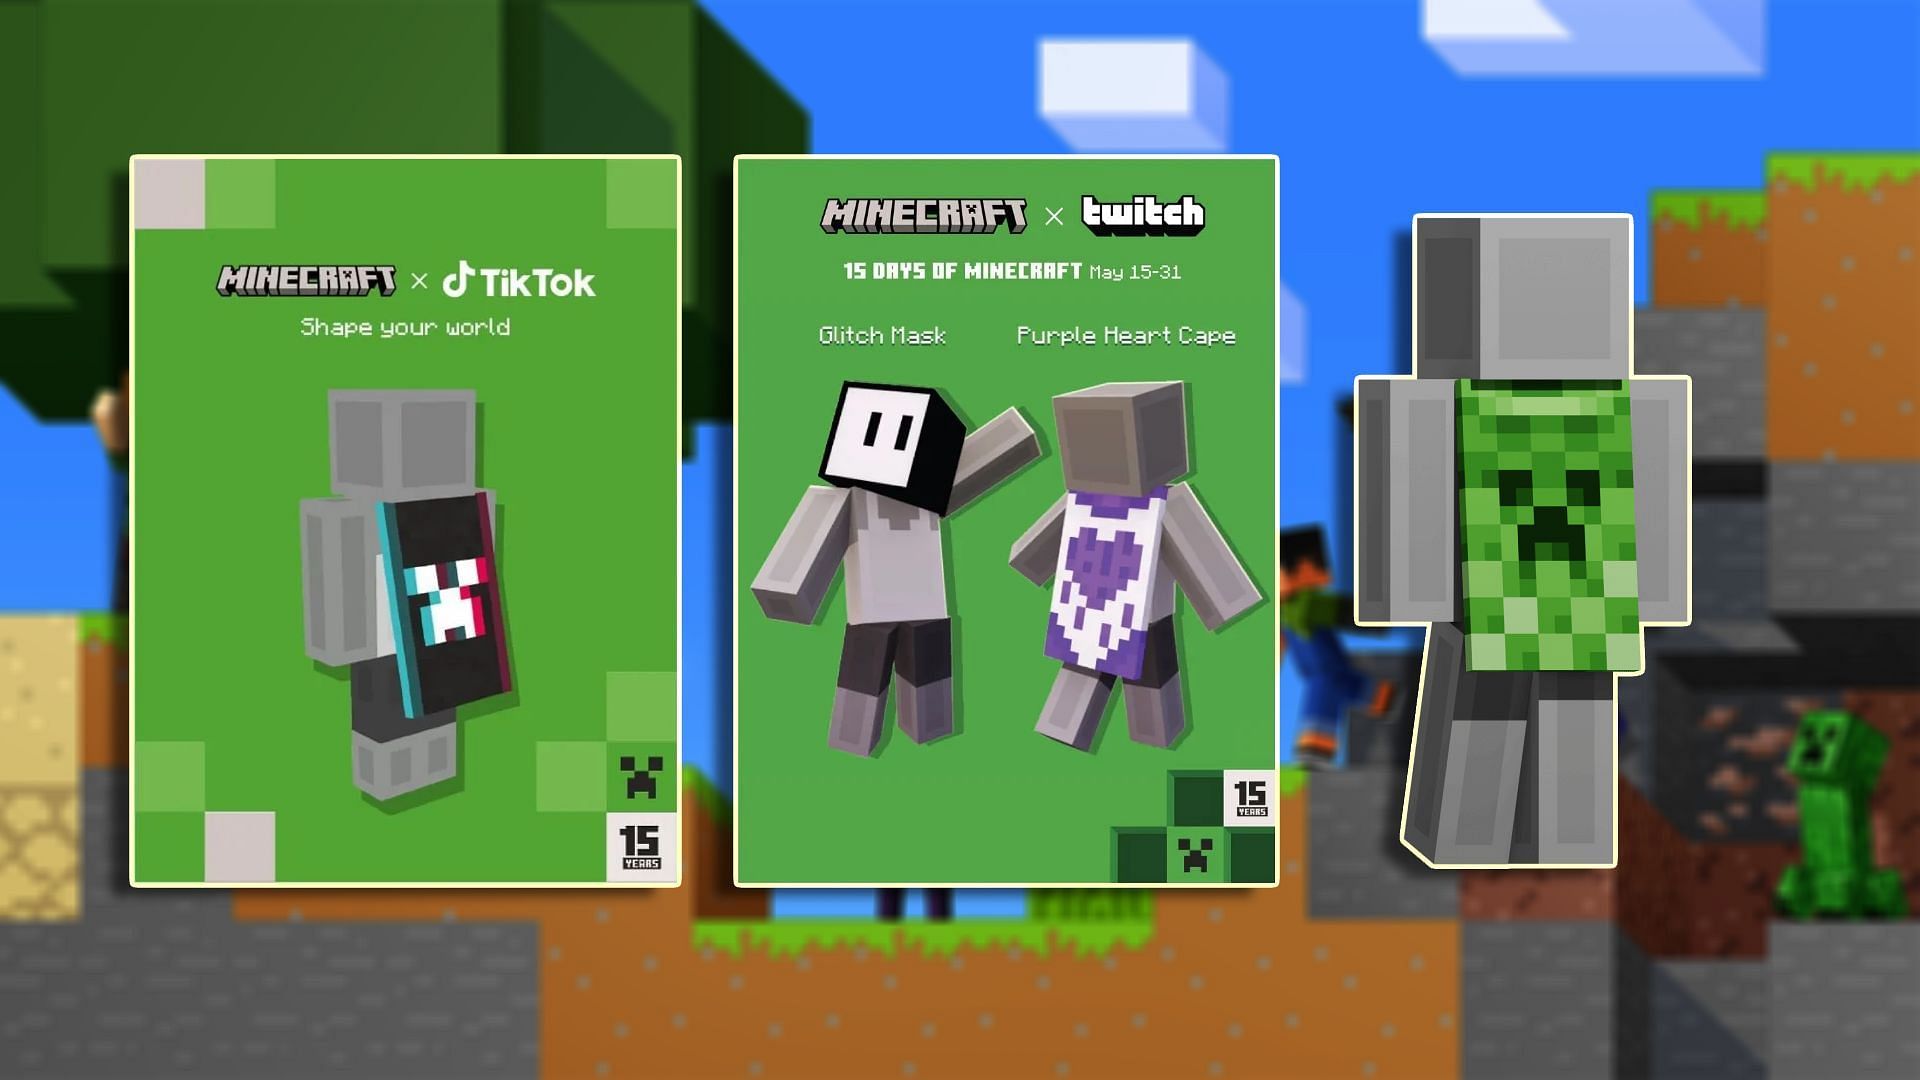 These anniversary capes are a major reason to learn how to use Minecraft codes (Images via Mojang)